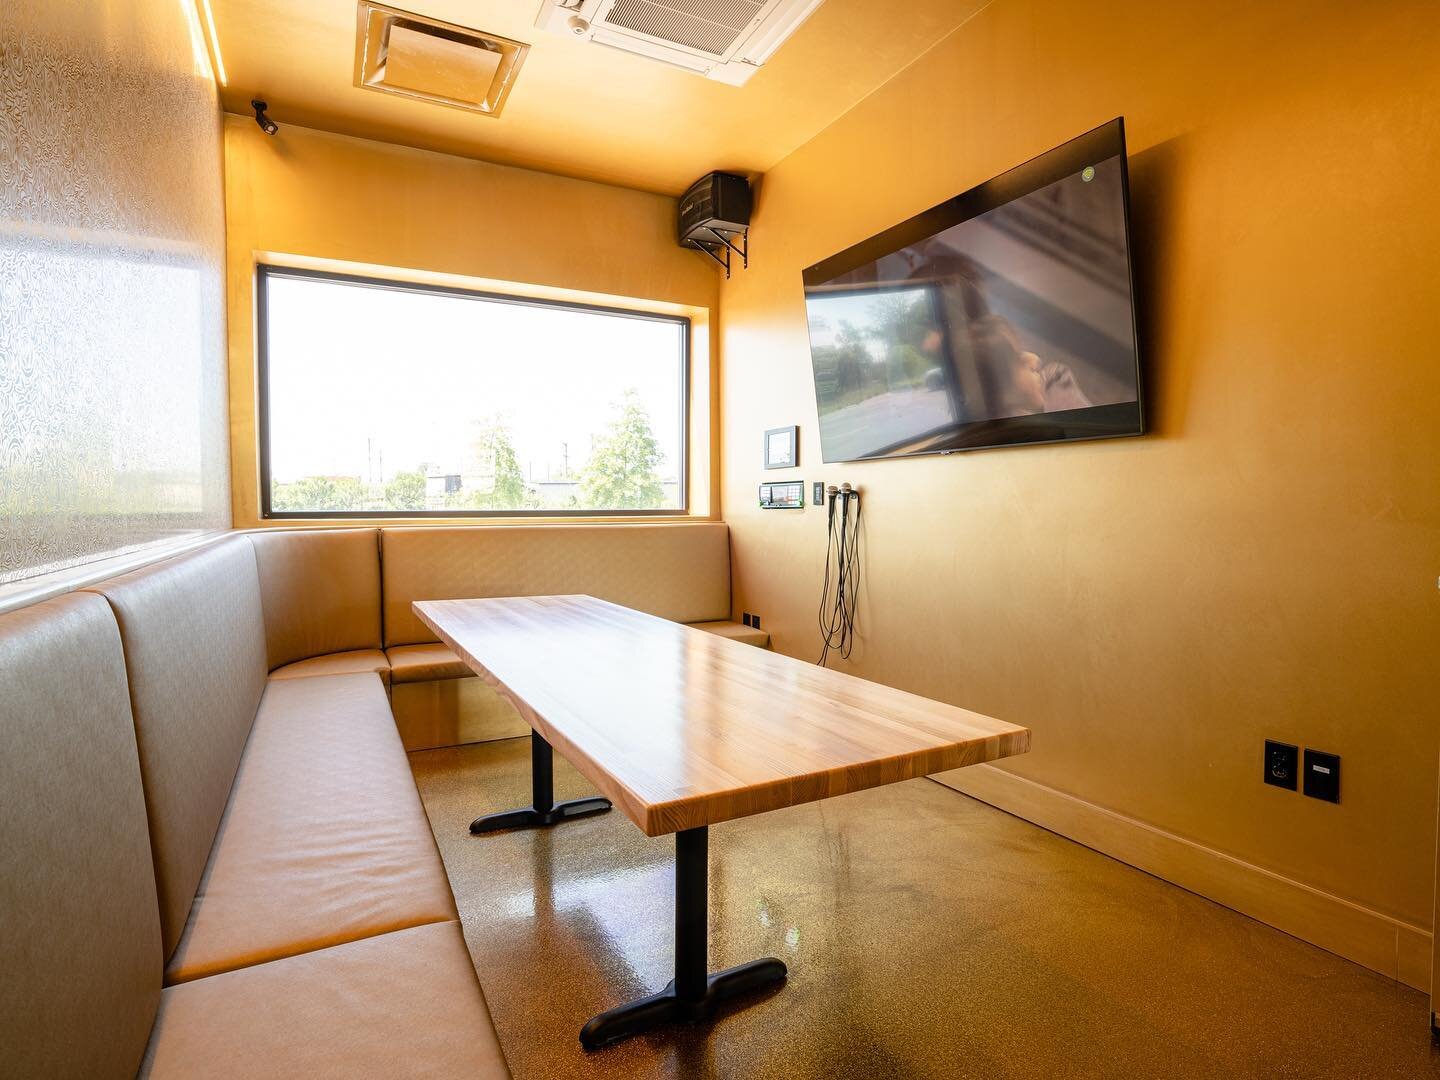 #NewMusic alert: Our karaoke software has been upgraded with new songs! And you don&rsquo;t have to wait for a special occasion to sing your heart out &mdash; Rooms can be booked room anytime we&rsquo;re open. 💛 [Seoul Food - Mill District GOLD ROOM